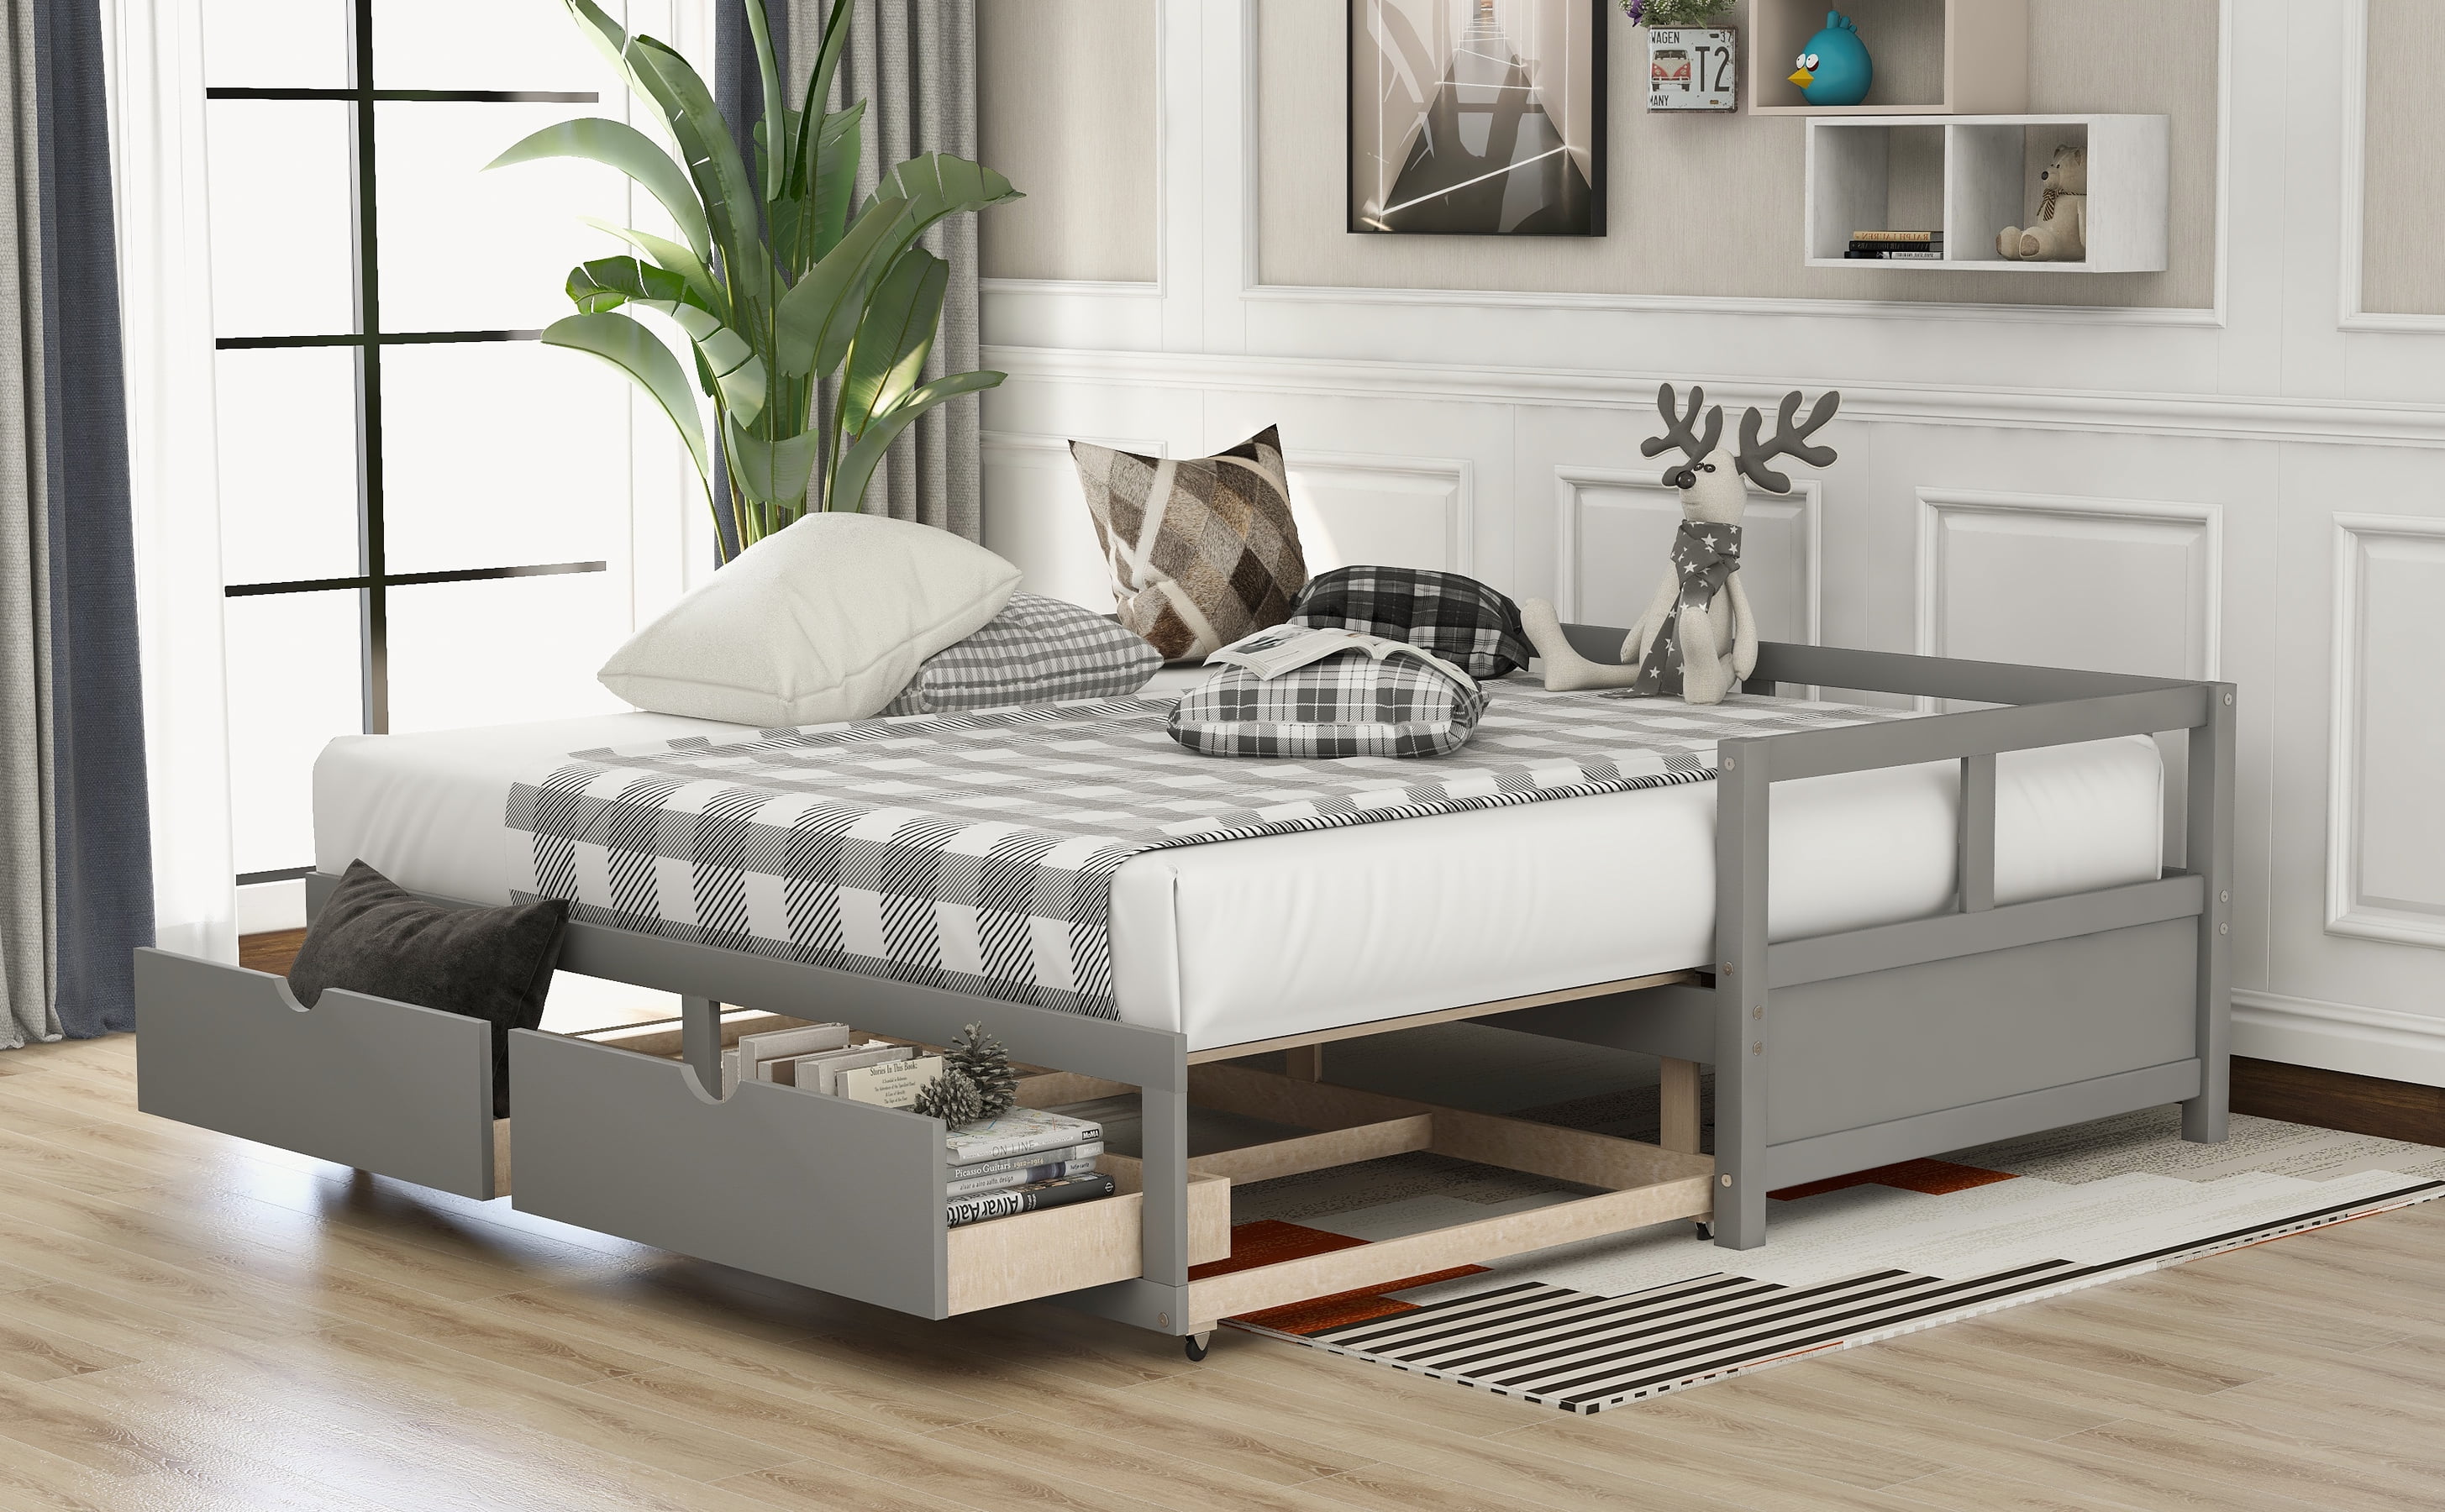 Details about   Daybed with 2 Storage Drawers Wood Bed Frame Day Bed Furniture With Wood Slats 